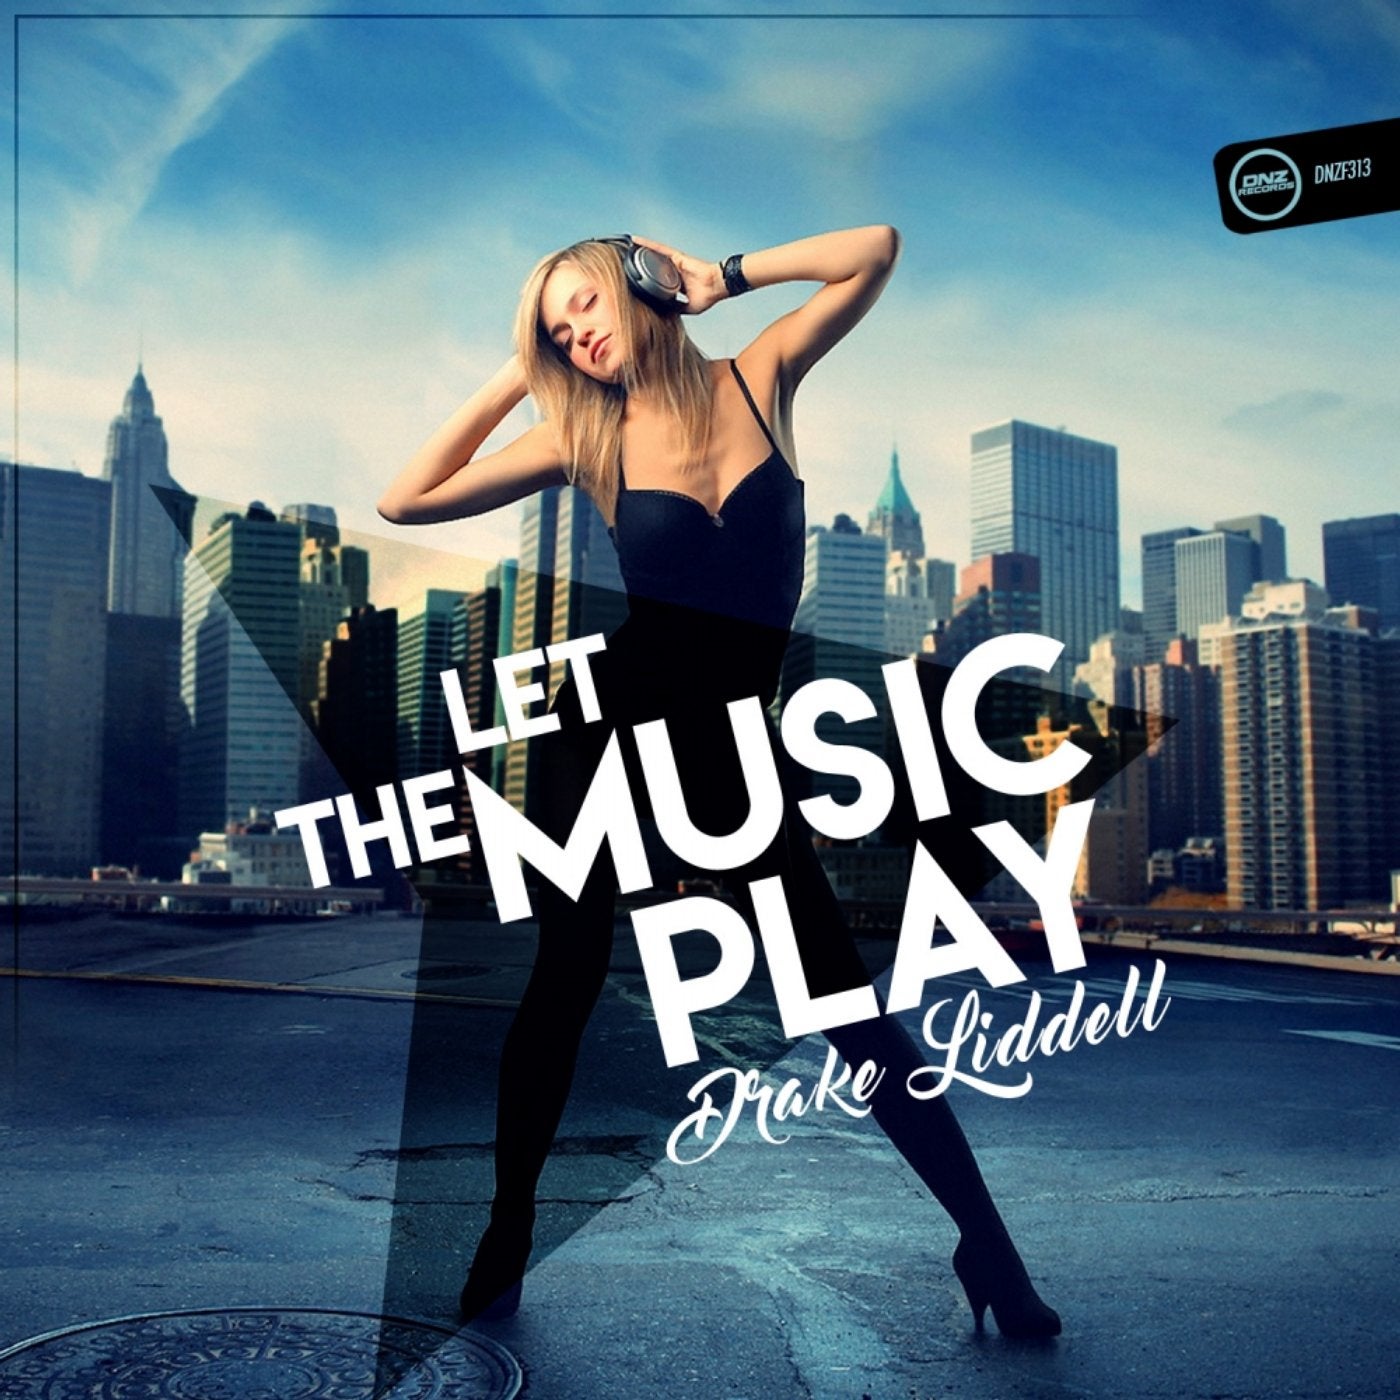 Single play. Жесткий дэнс. Play музыка 2014. Let the Music Play. Let the Music Play картинка.